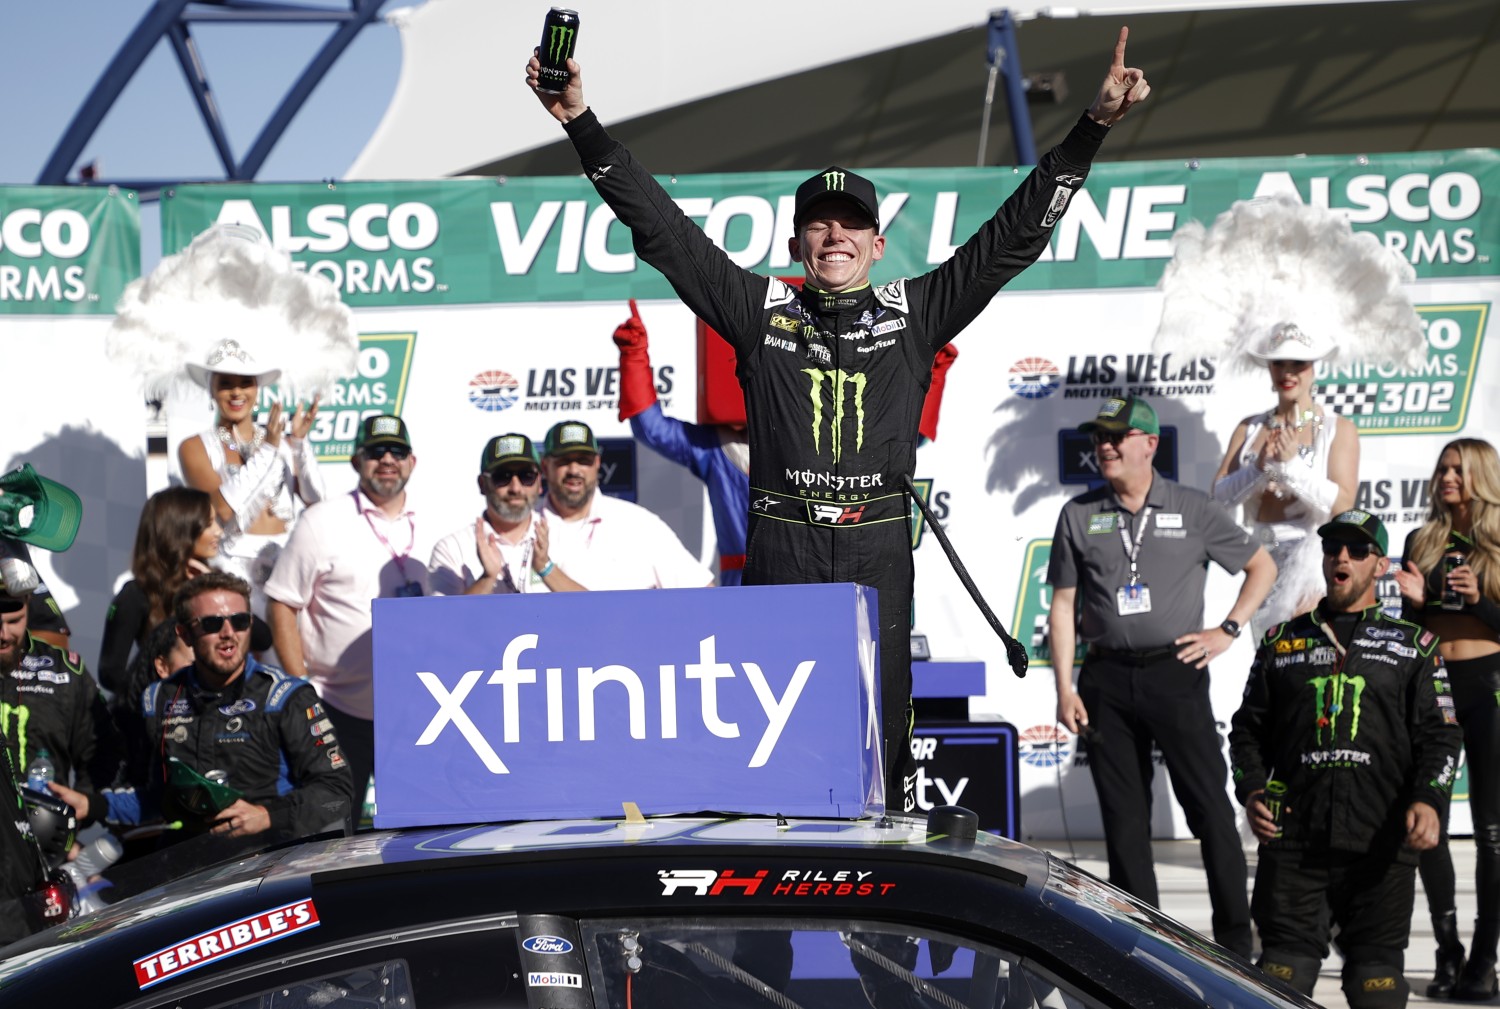 Riley Herbst, driver of the #98 Monster Energy Ford, celebrates in victory lane after winning the NASCAR Xfinity Series Alsco Uniforms 302 at Las Vegas Motor Speedway on October 14, 2023 in Las Vegas, Nevada. (Photo by Chris Graythen/Getty Images)